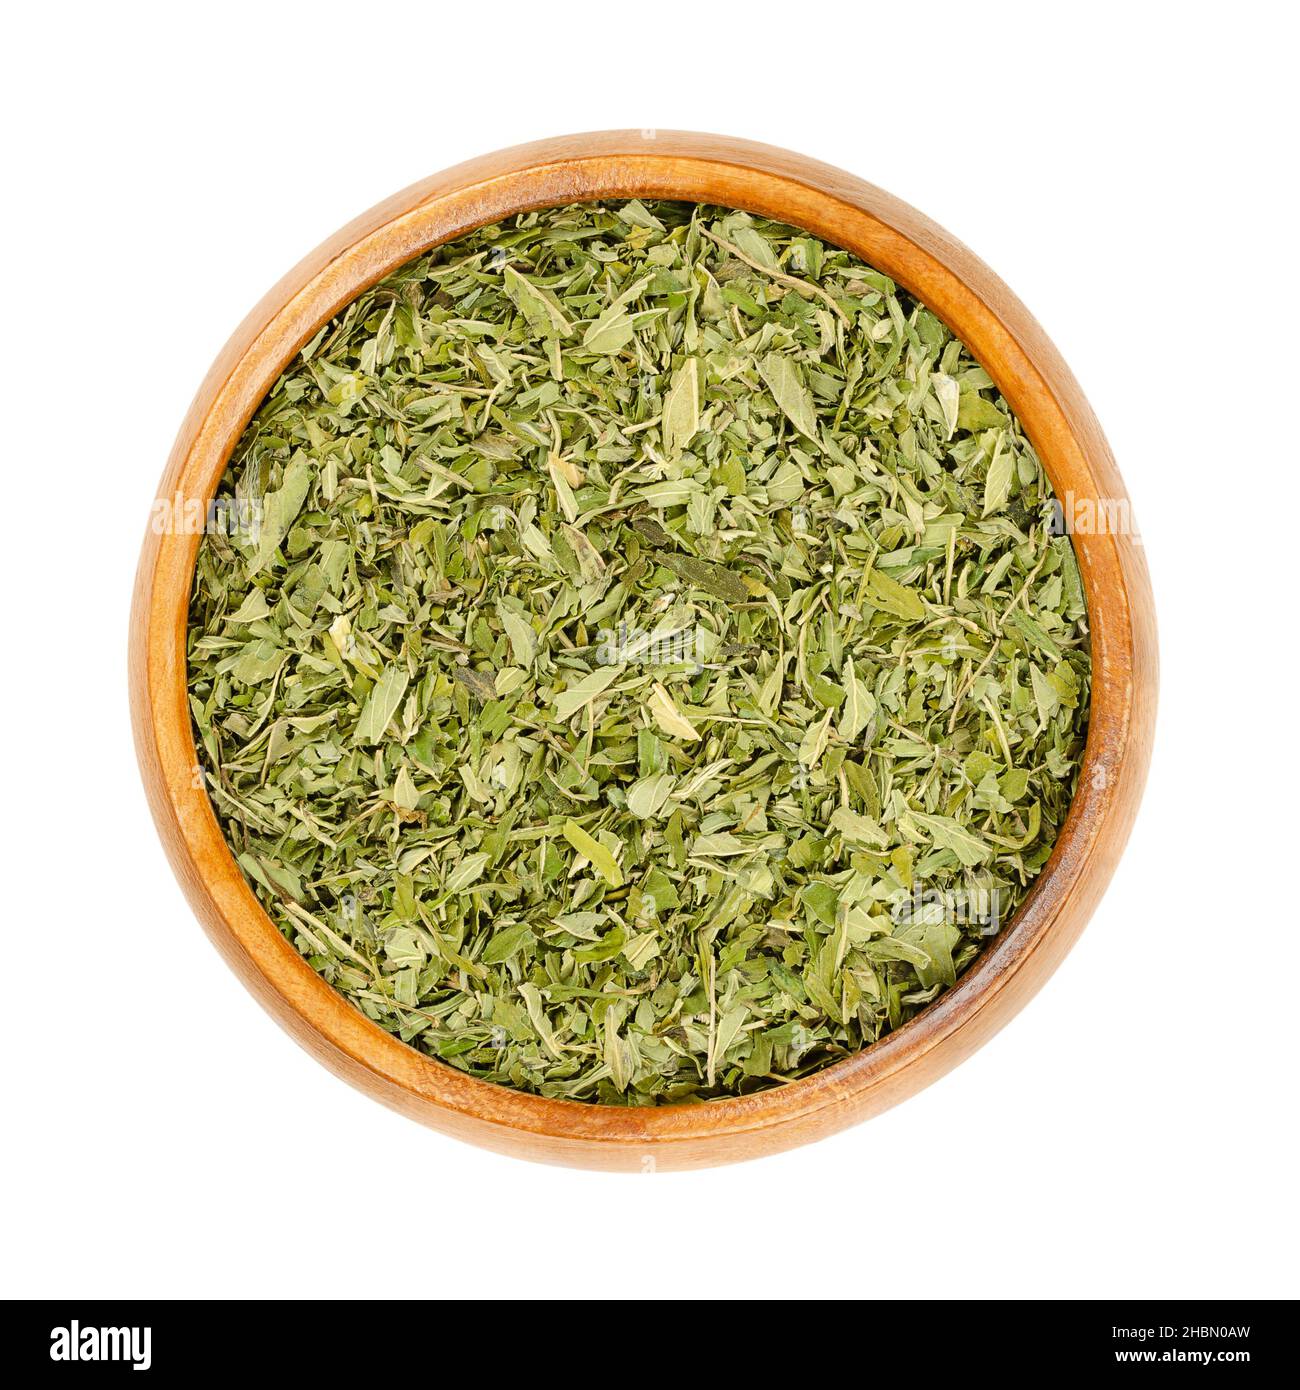 Hemp tea leaves, in a wooden bowl. Dried hemp leaves, Cannabis sativa, to be used as tea, spice, incense or as addition to the bath. Pure hemp leaves. Stock Photo